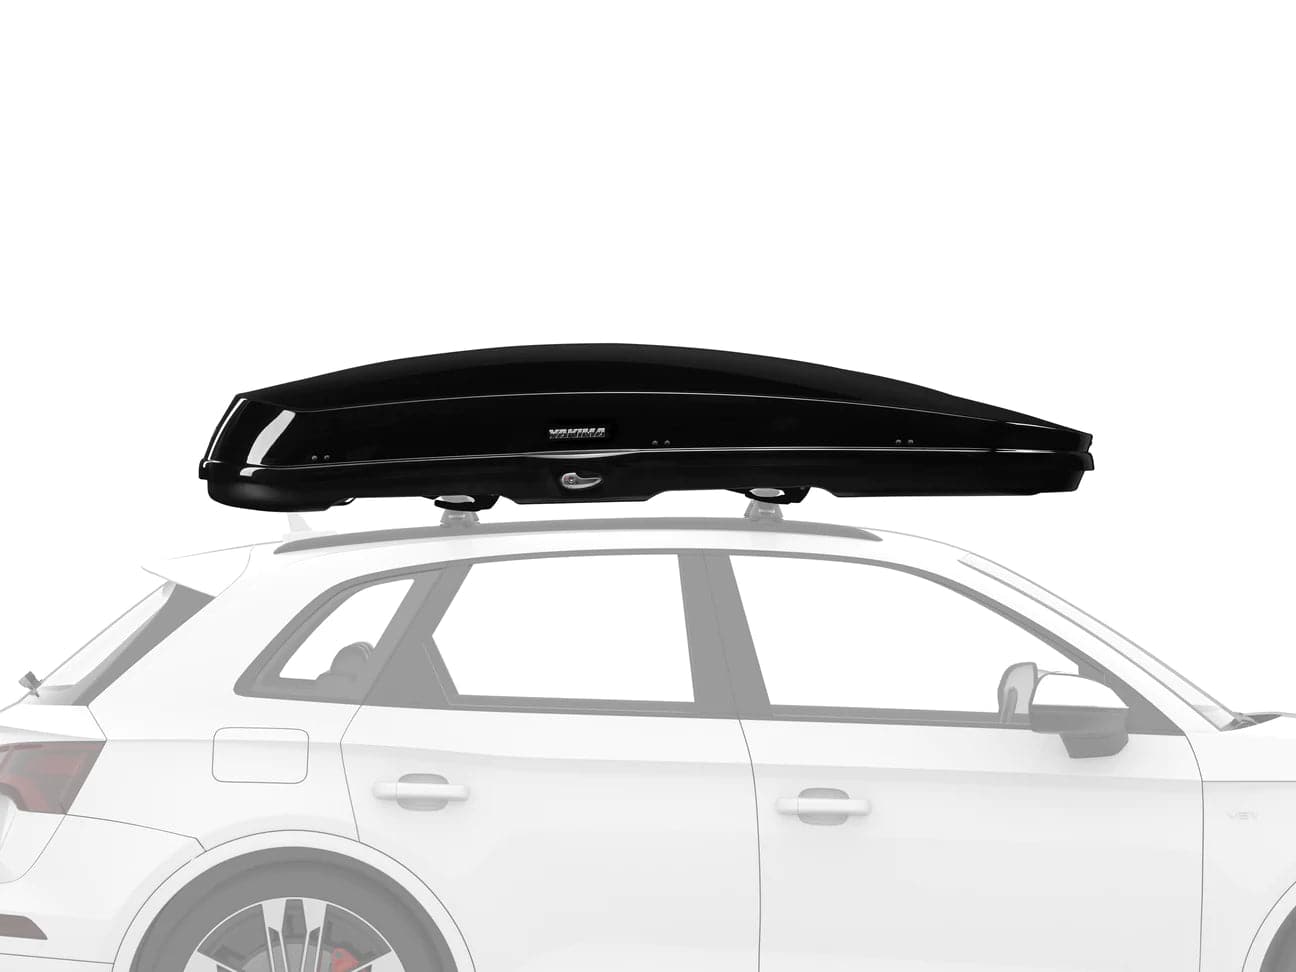 Featuring the GrandTour 18 cargo box manufactured by Yakima shown here from a fourth angle.